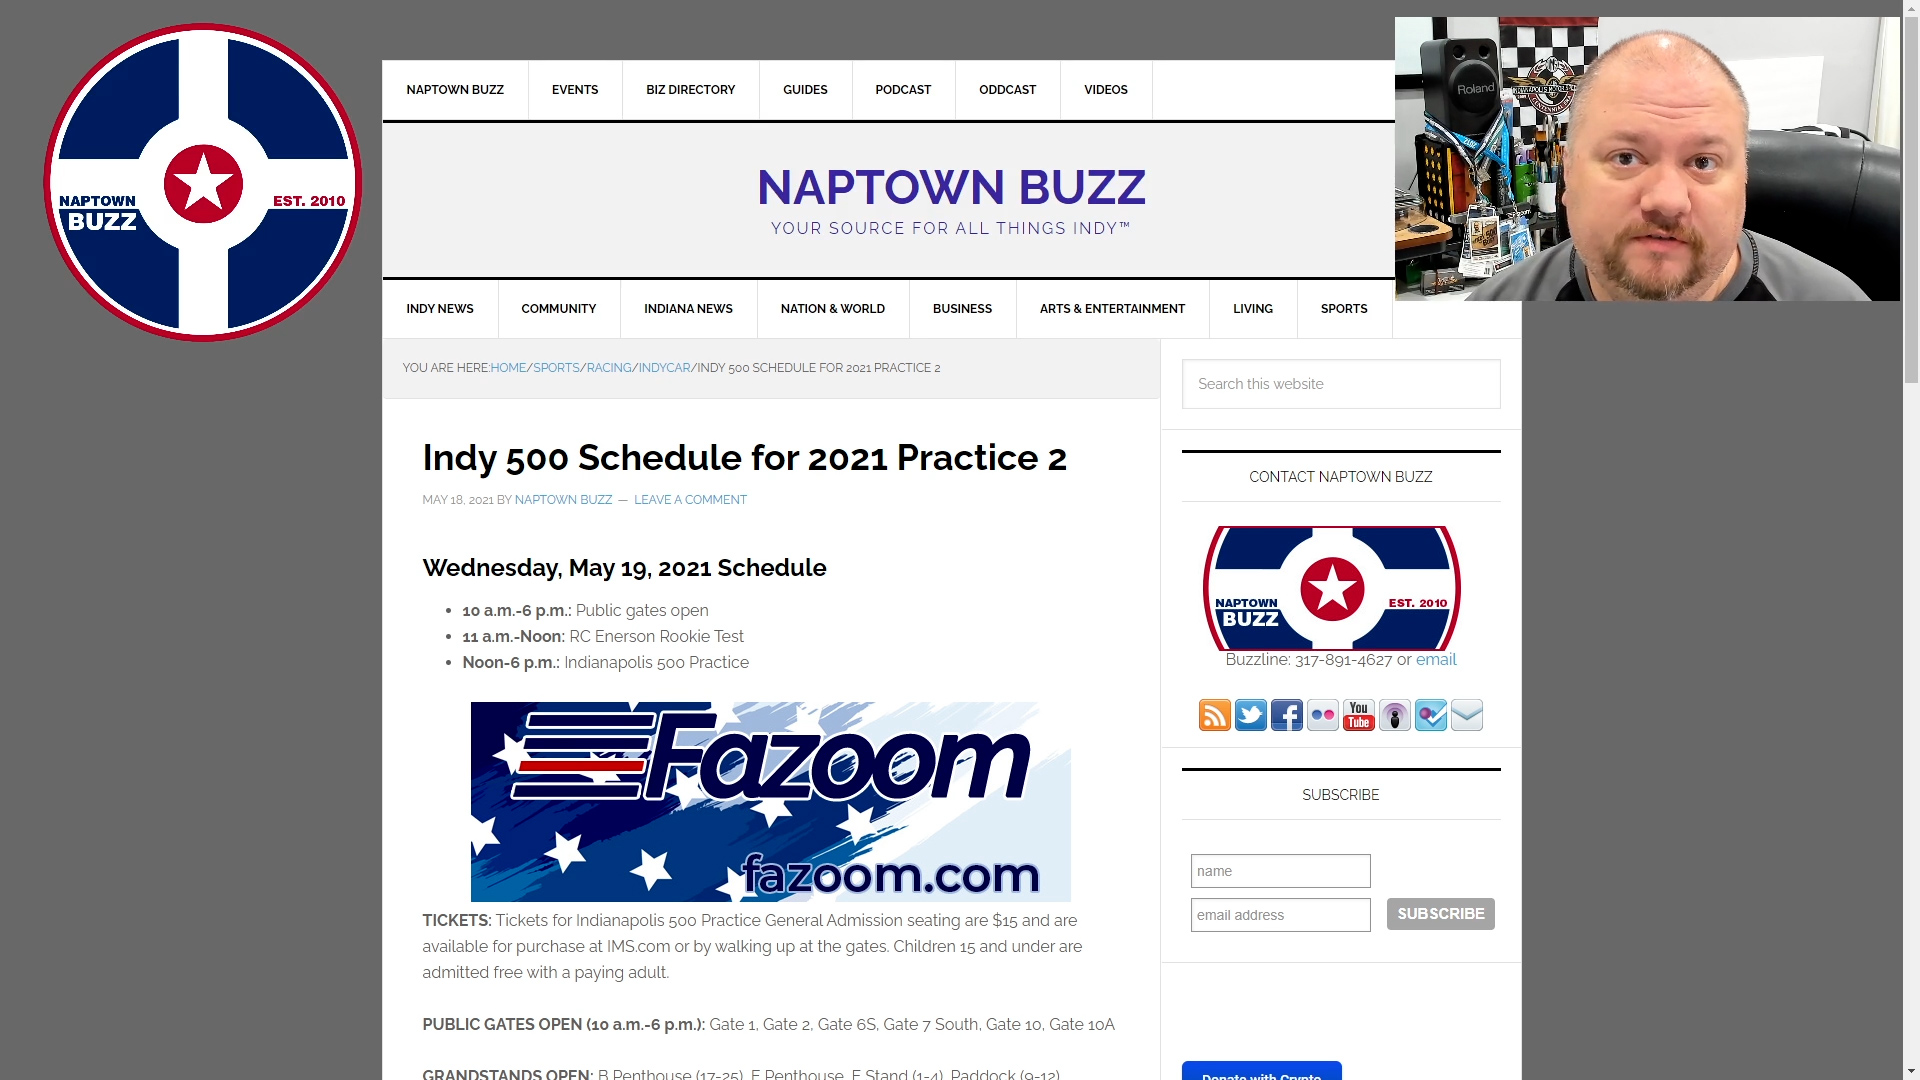 Indy 500 Schedule for May 19, 2021 Practice Day 2